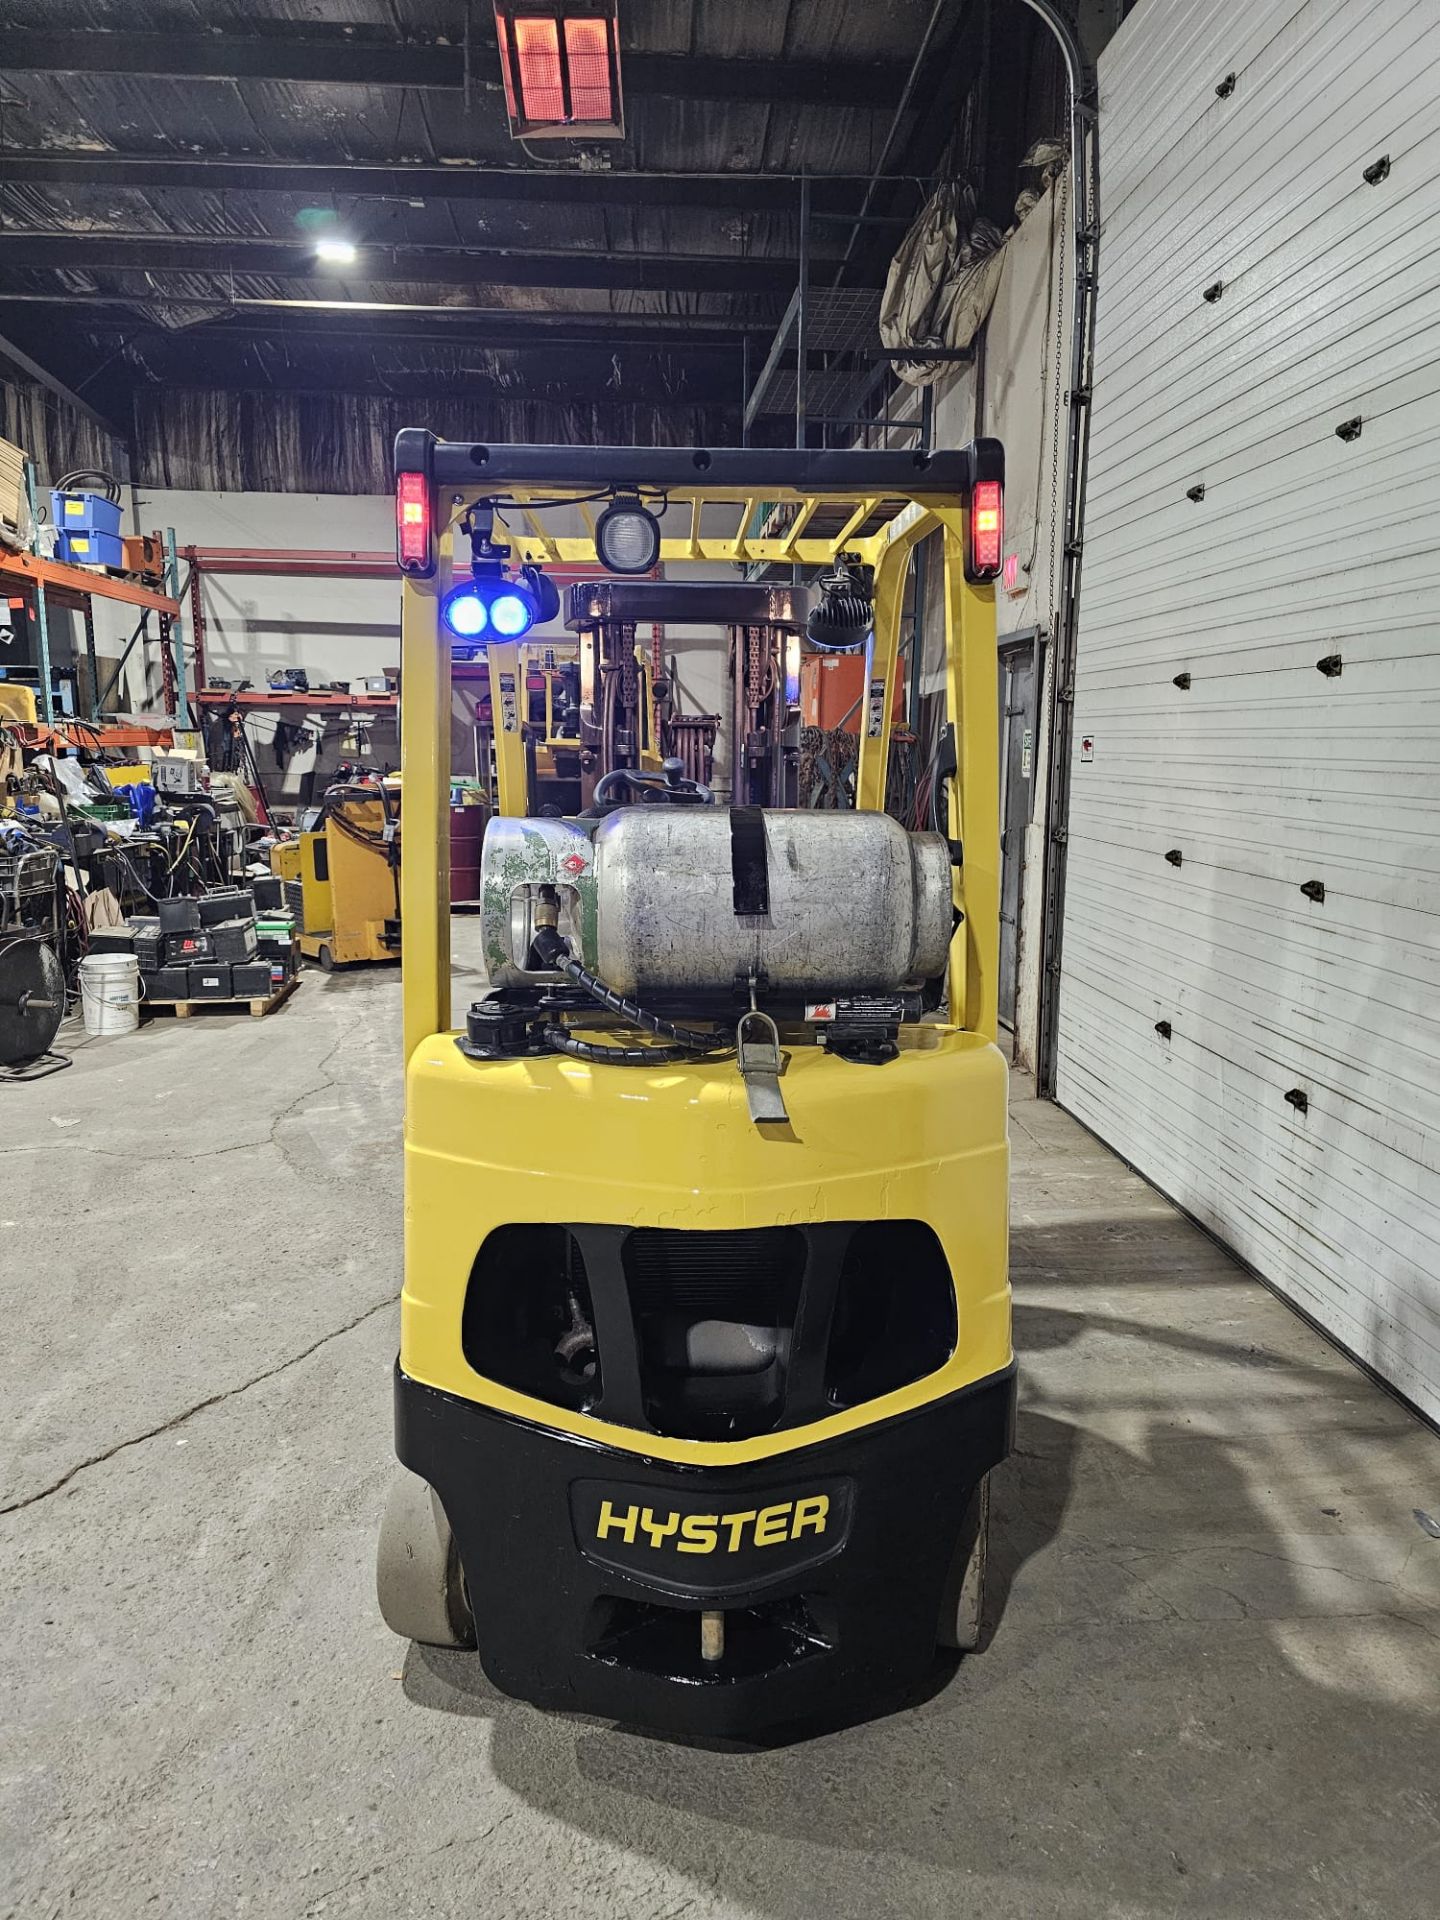 2016 HYSTER 5,000lbs Capacity LPG (Propane) Forklift with sideshift - 4 function control hookup & - Image 4 of 8